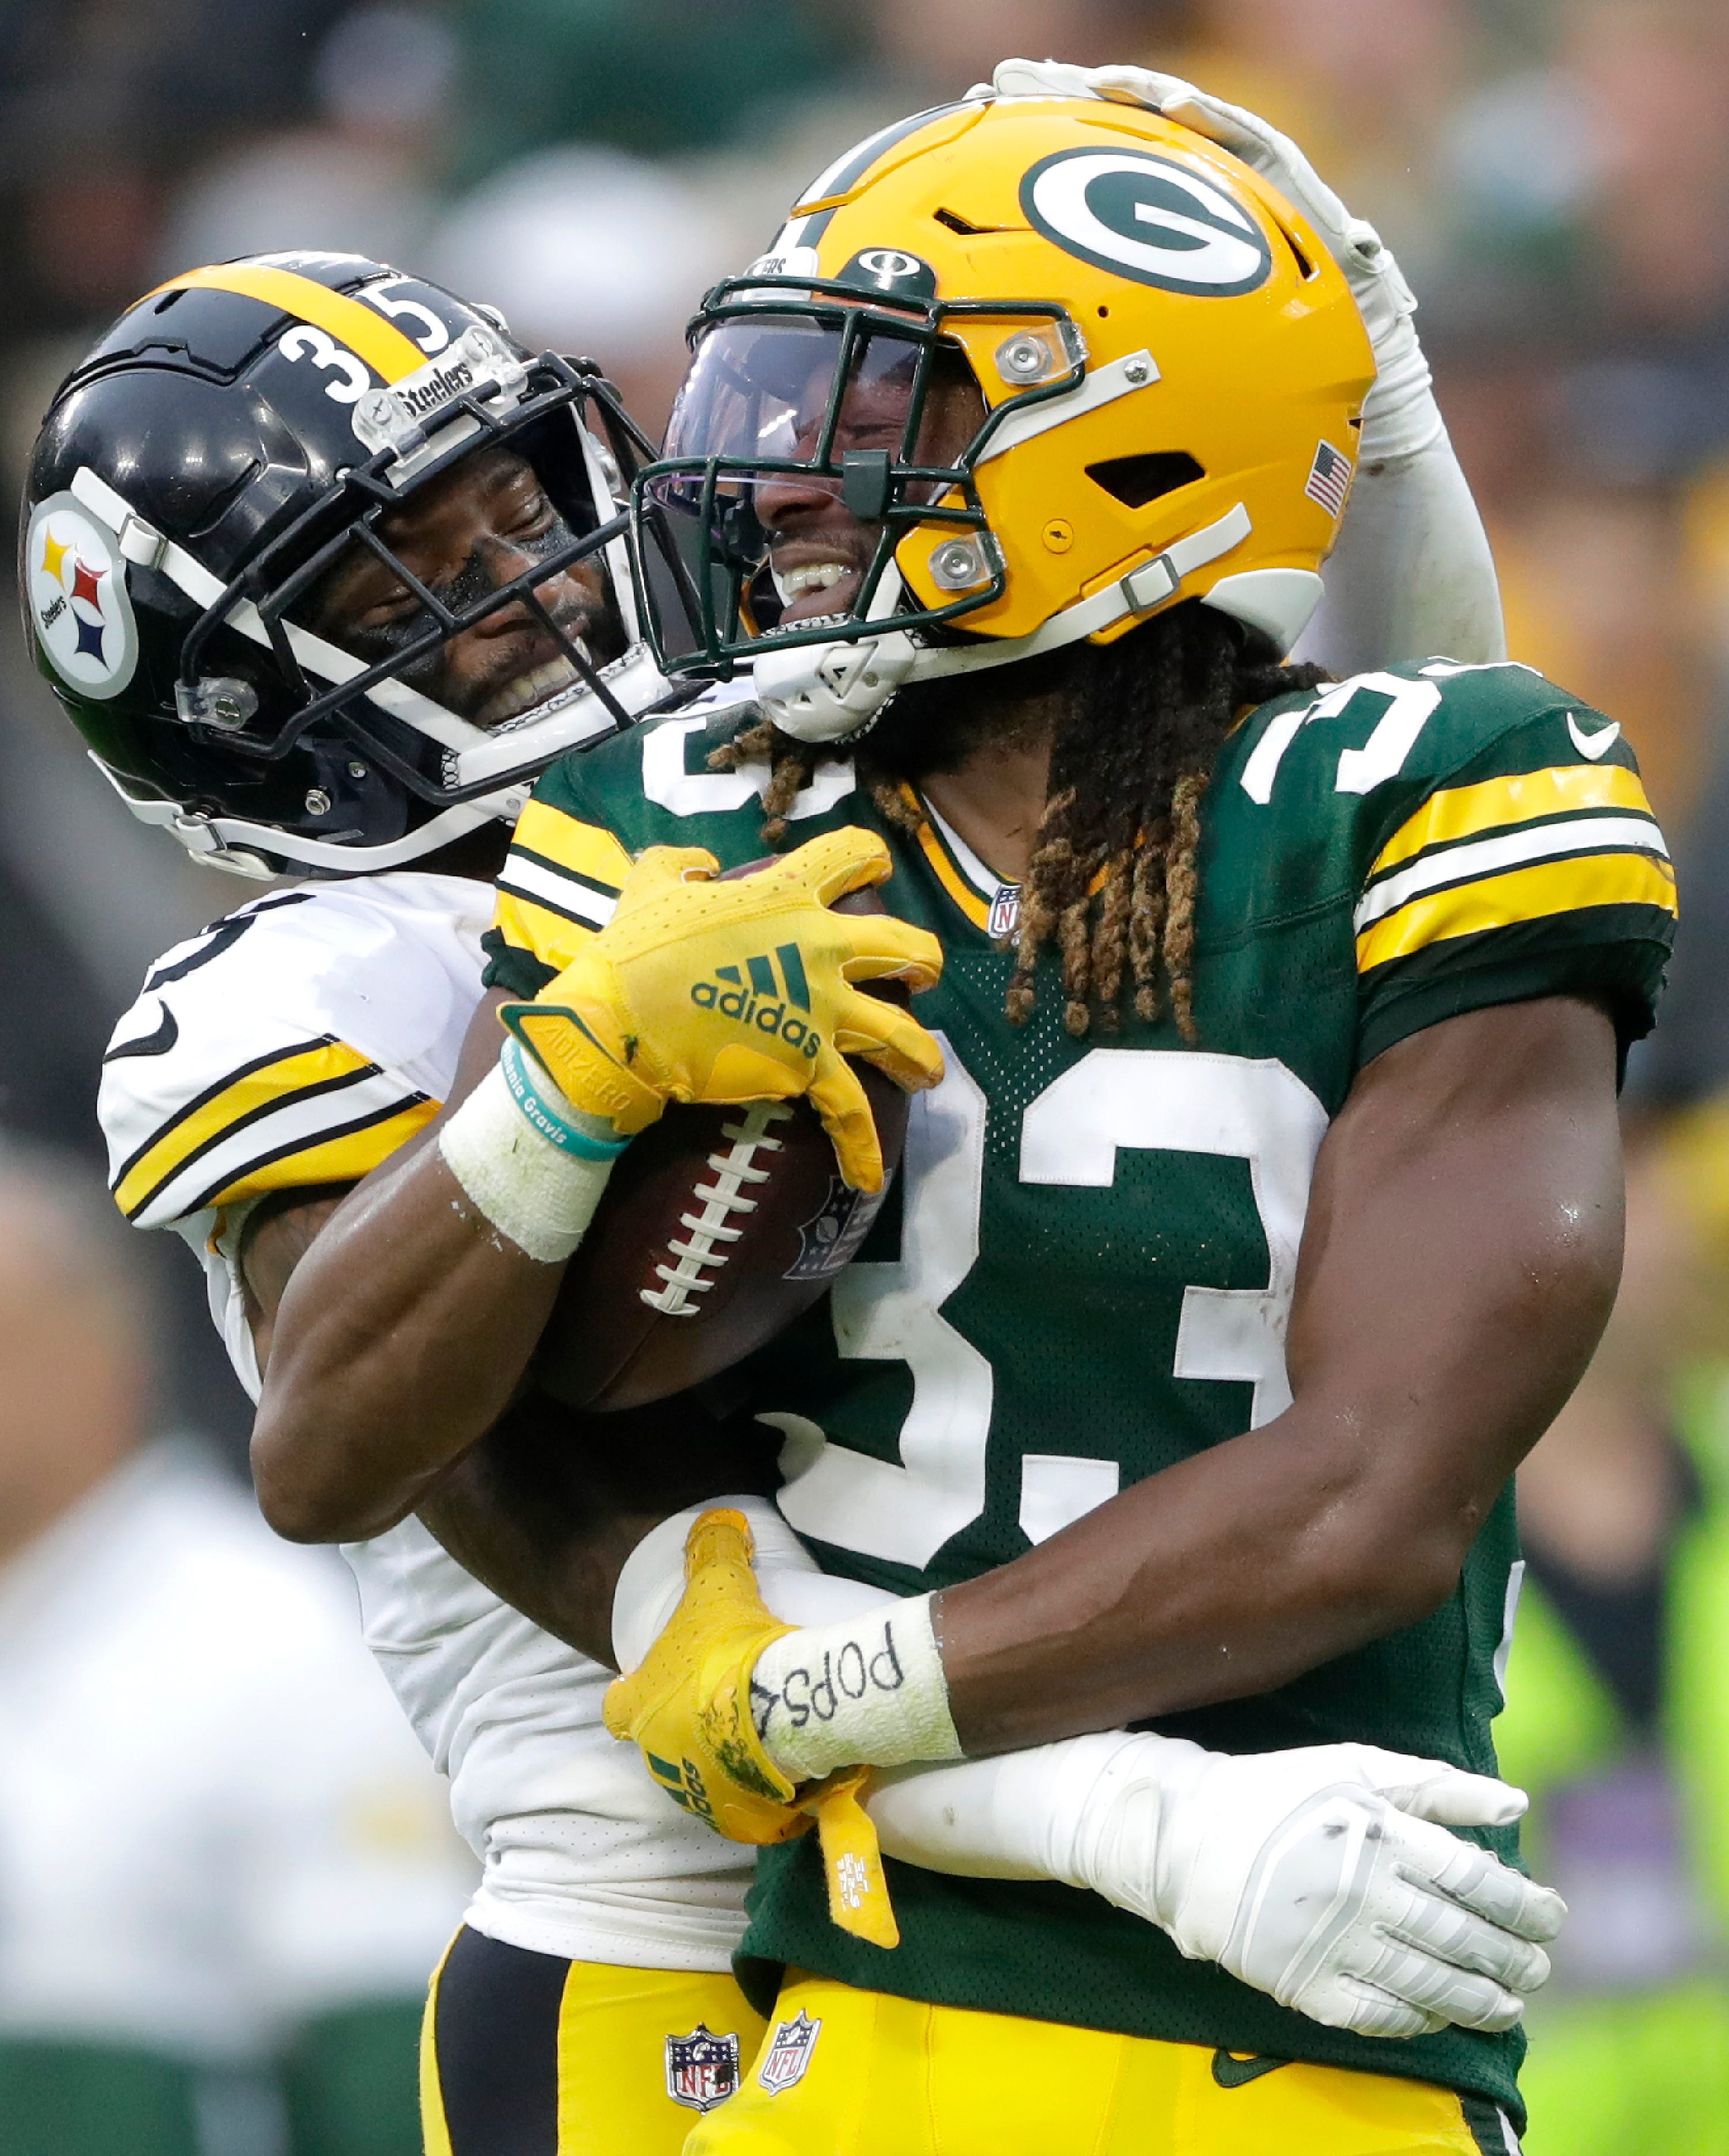 Green Bay Packers running back Aaron Jones (33) and Pittsburgh Steelers cornerback Arthur Maulet (35) are helmet-to-helmet during a play on Sunday, Oct.  3, 2021, at Lambeau Field in Green Bay.